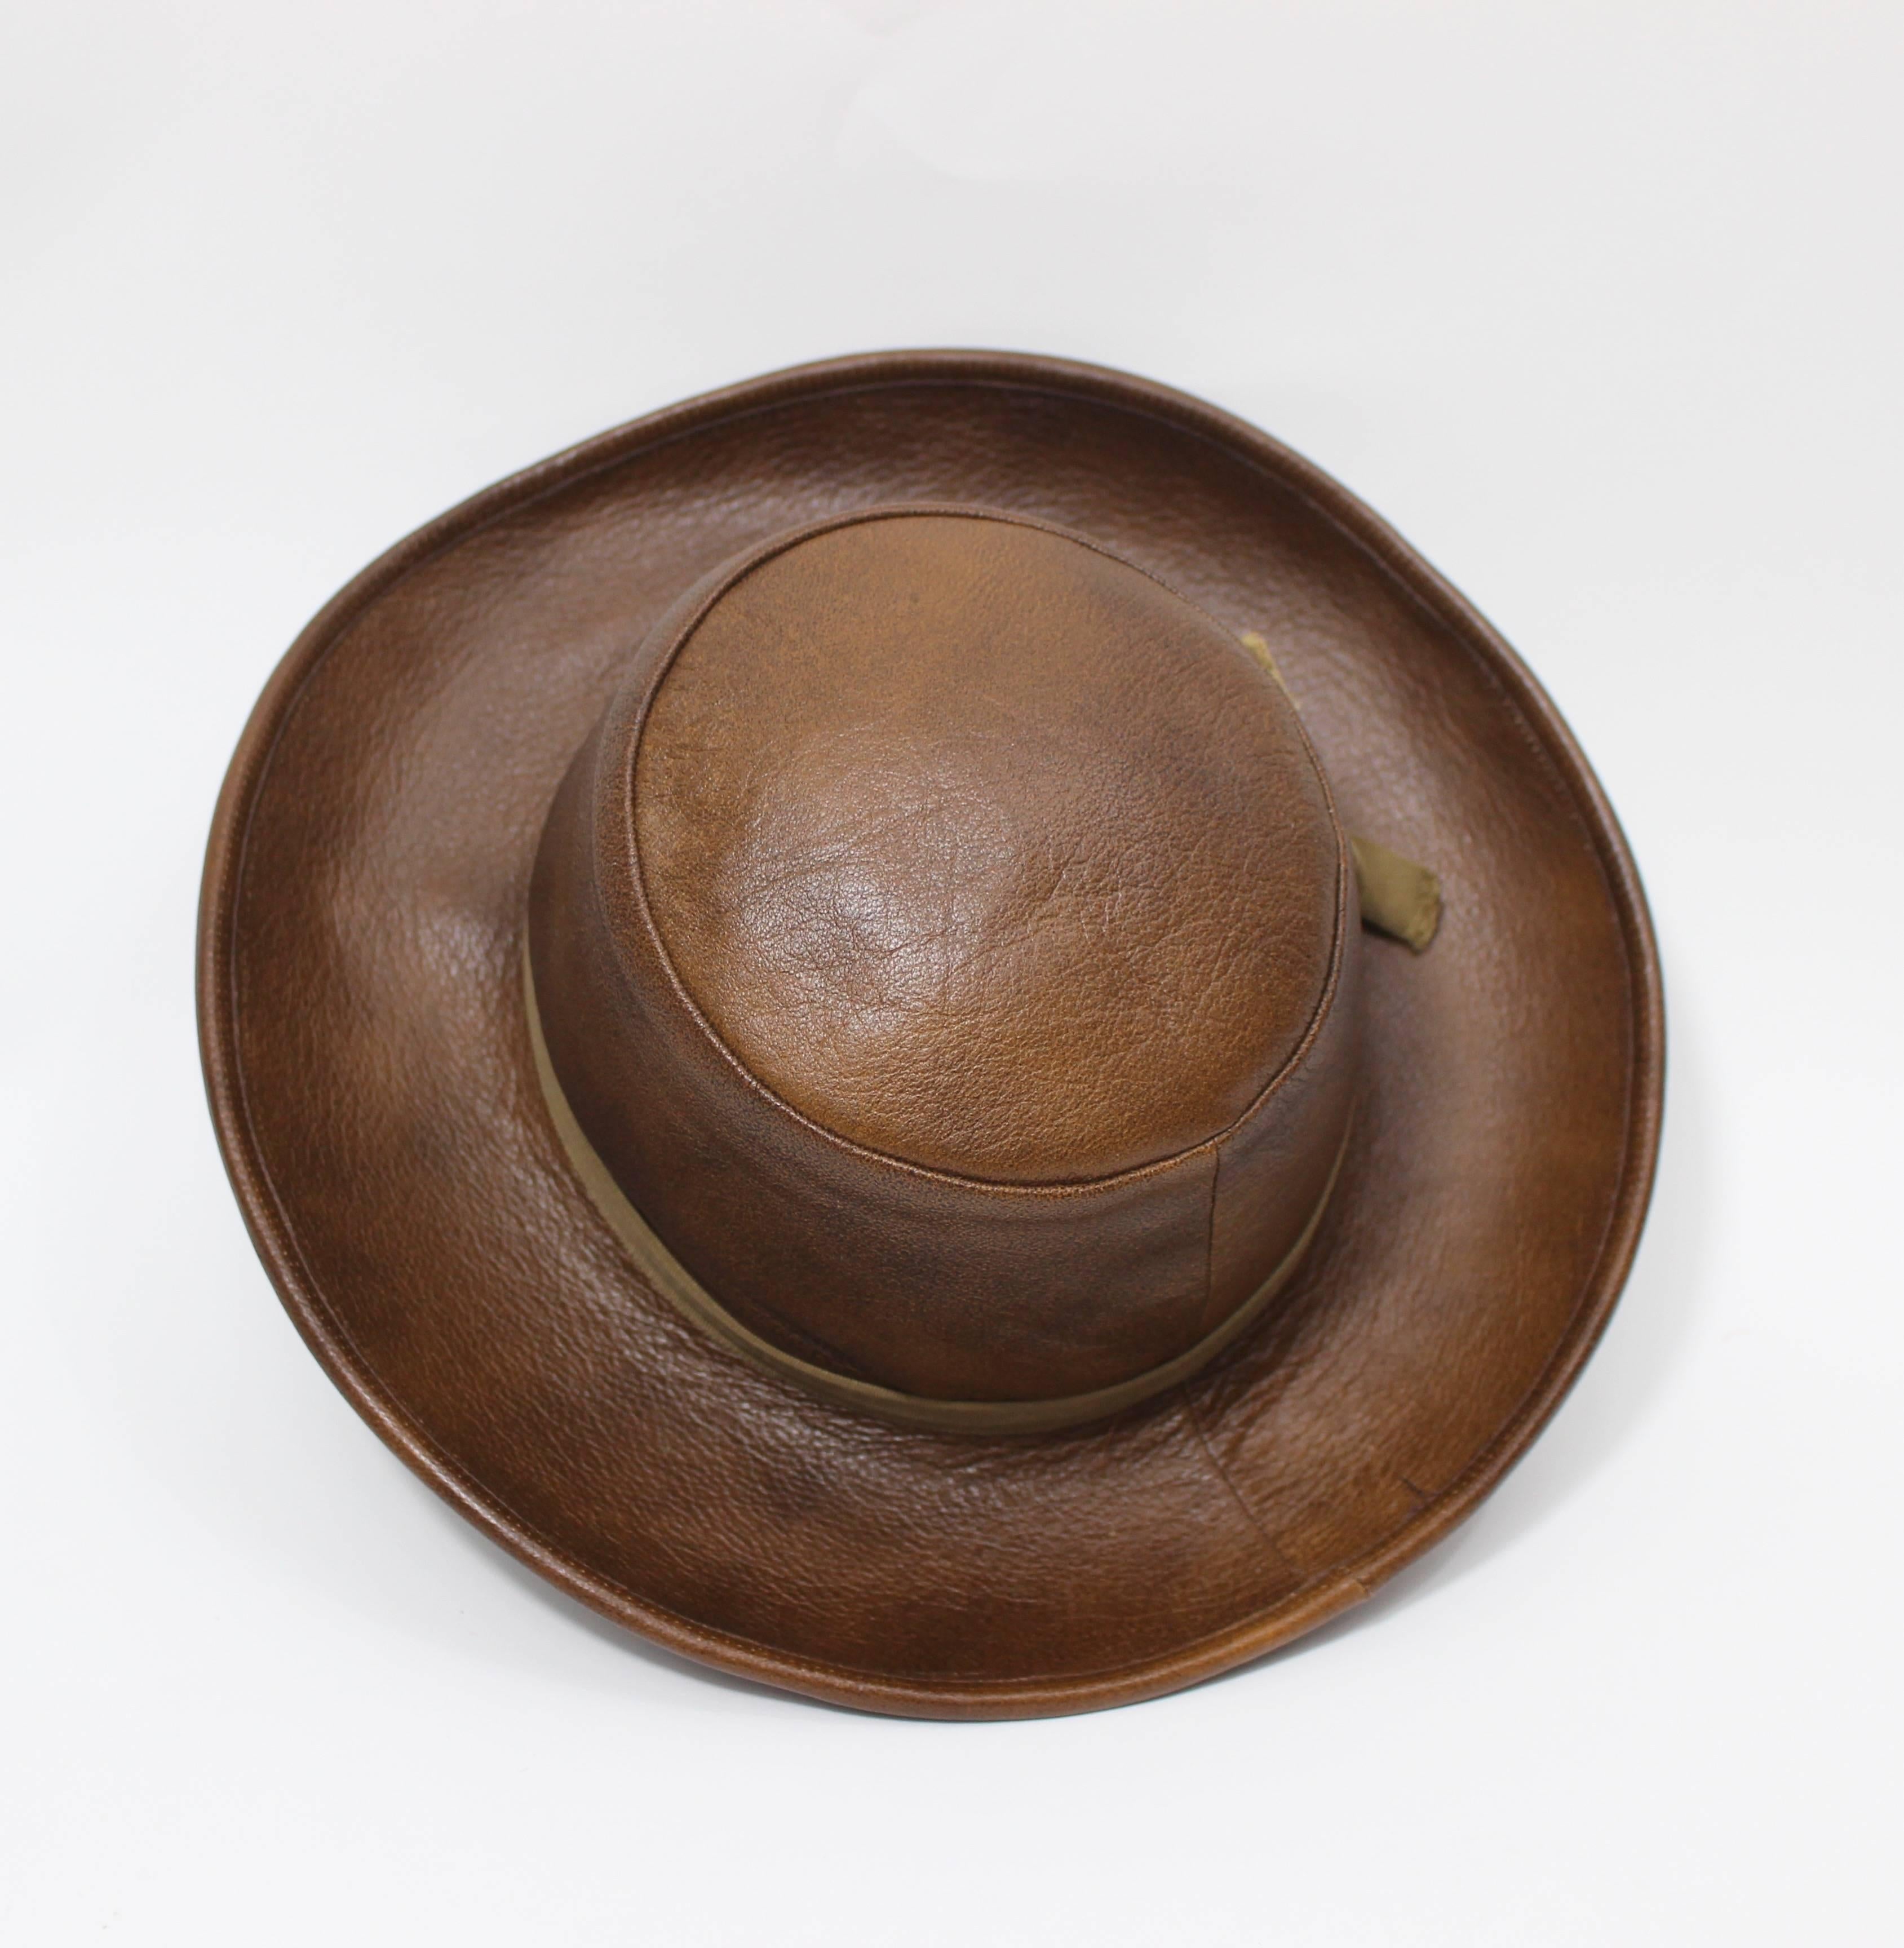  Yves Saint Laurent 1970s Brown Leather Hat Vintage YSL In Excellent Condition For Sale In Boca Raton, FL